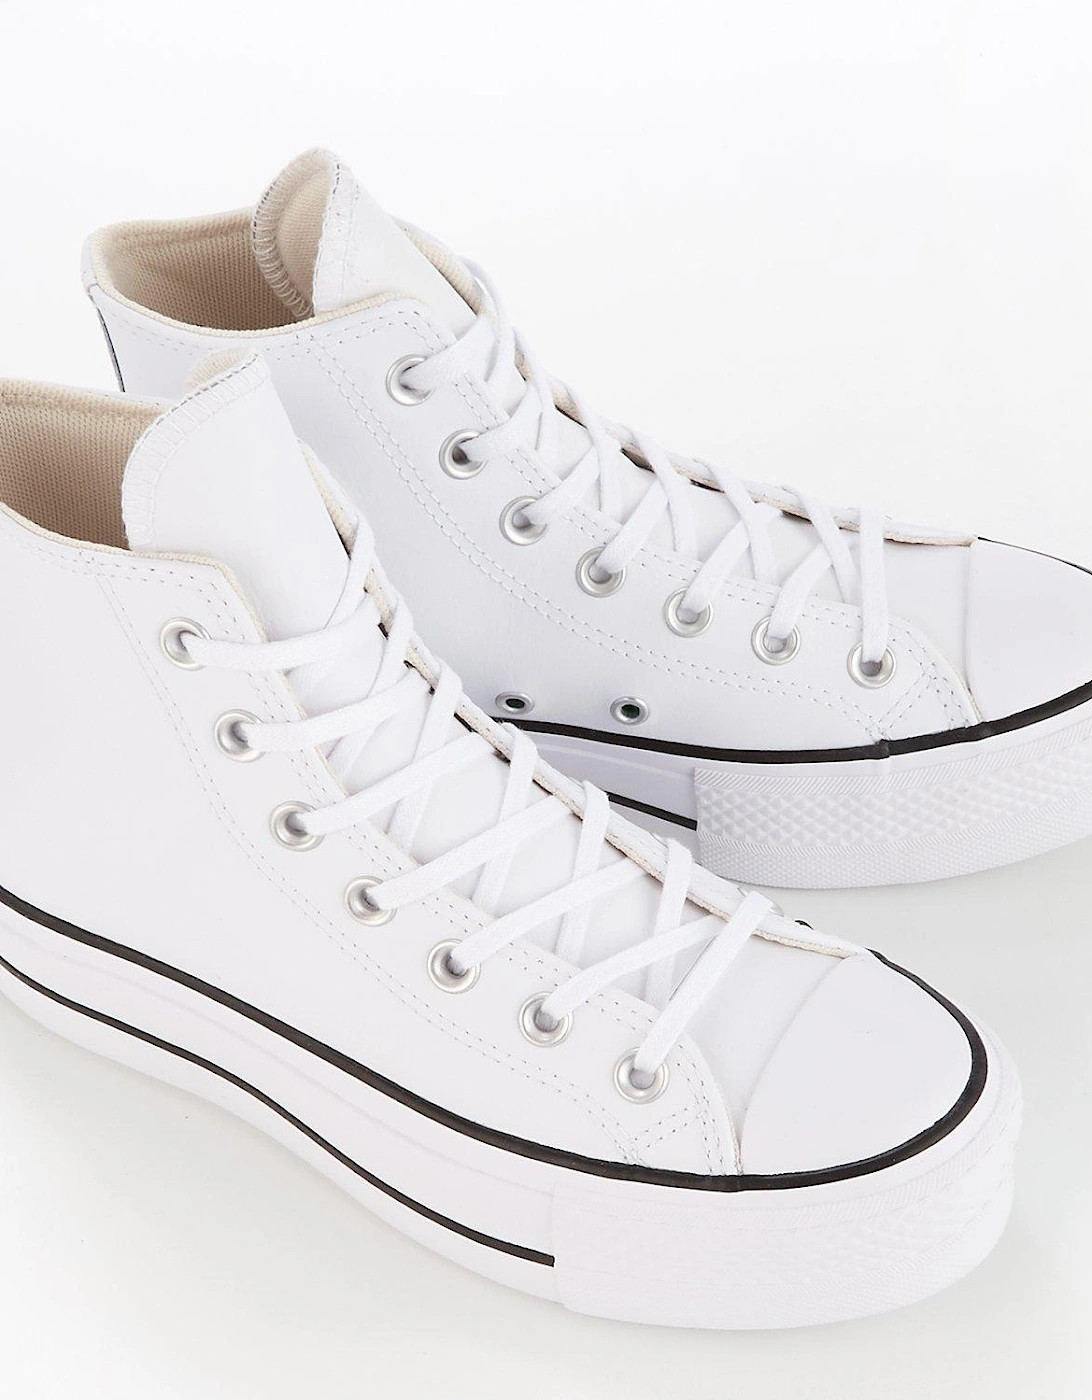 Womens Leather Lift Hi Top Trainers - White/Black